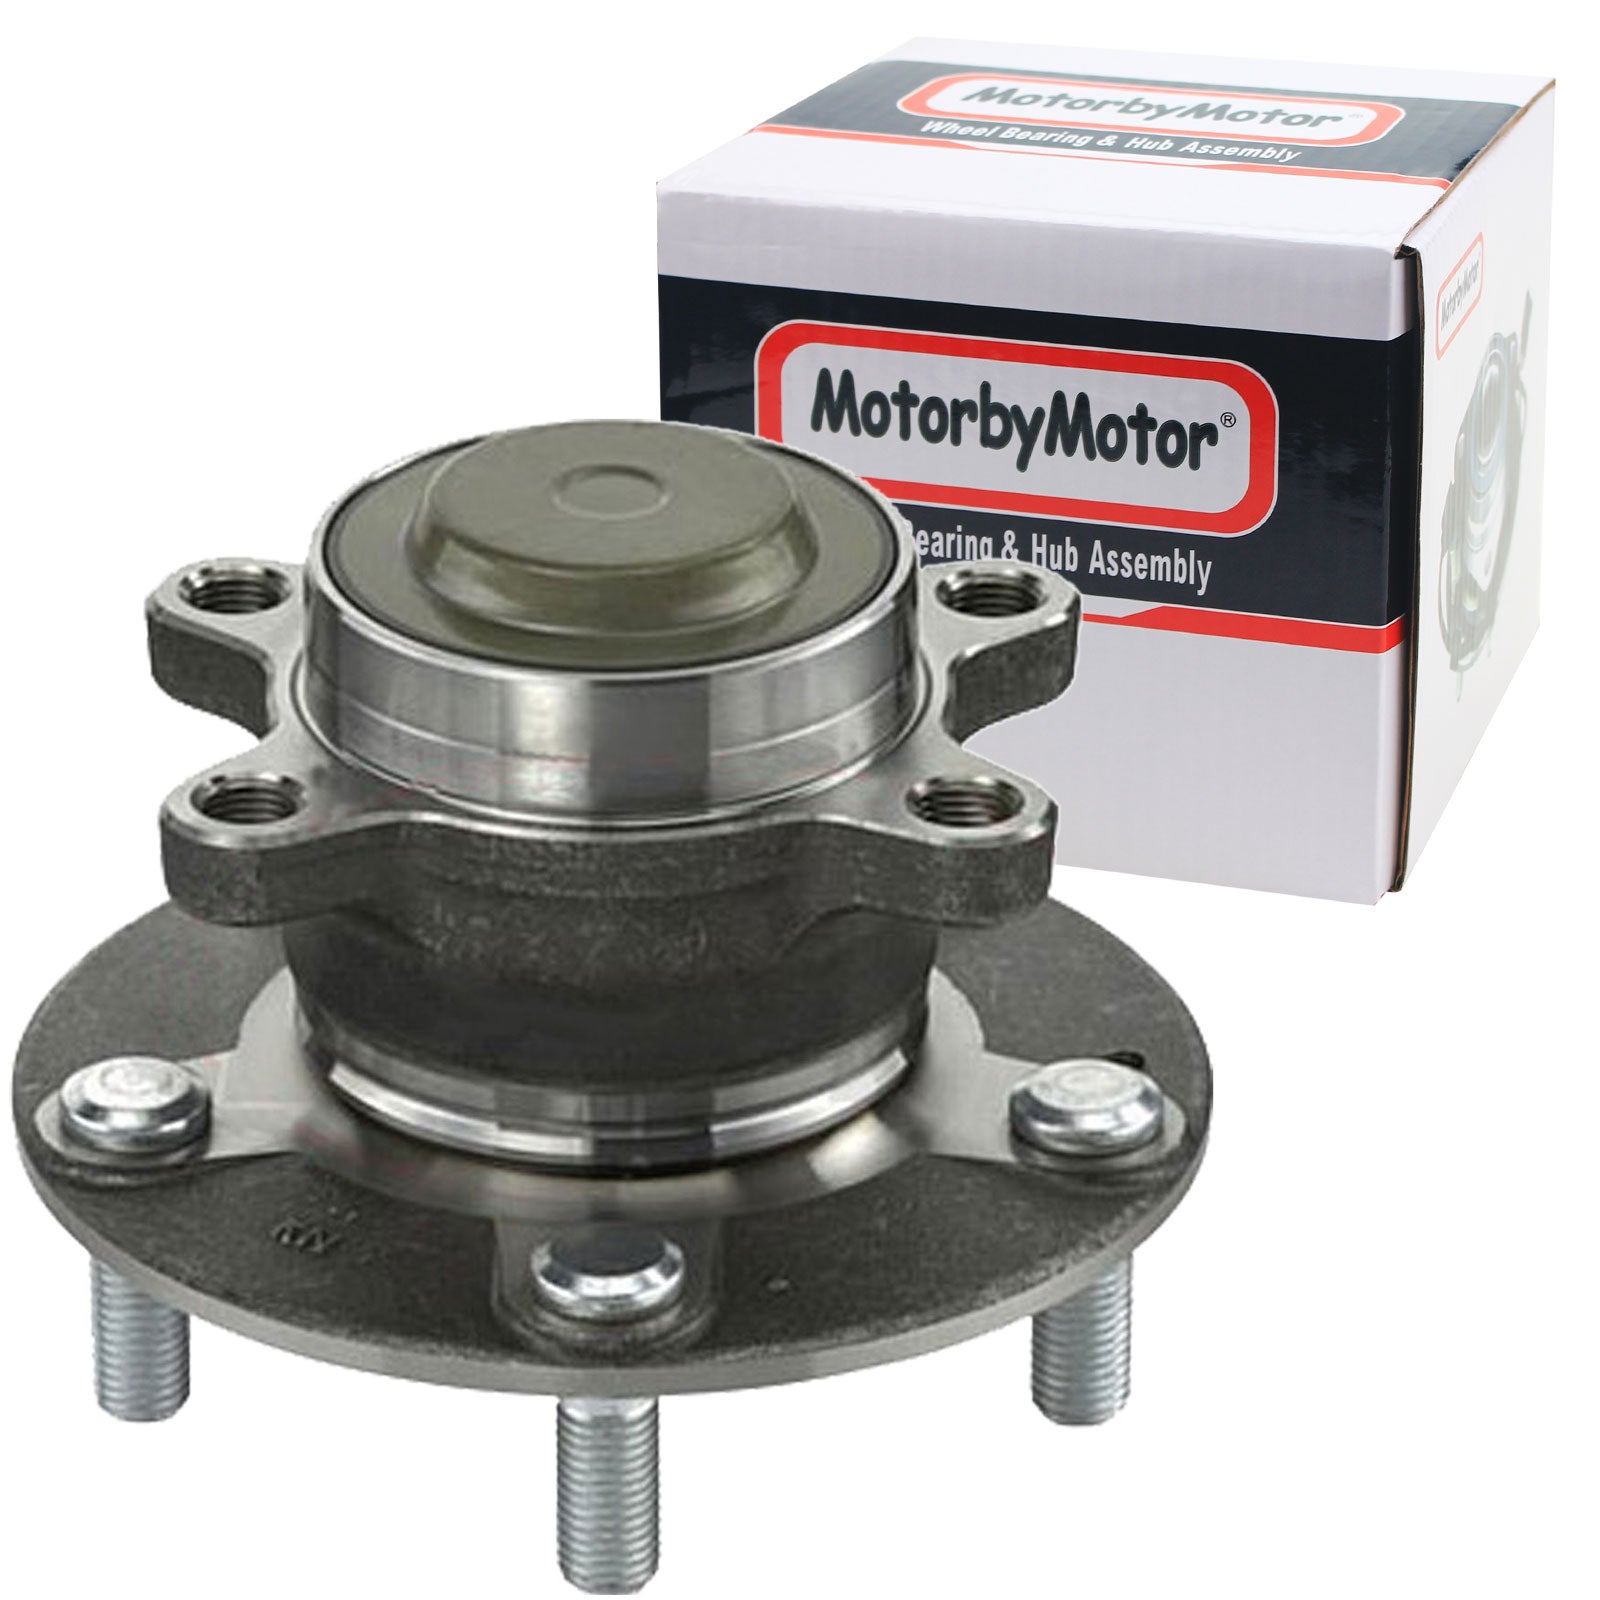 MotorbyMotor 512570 Rear wheel Bearing and Hub Assembly with 5 Lugs Fits for 2016-2019 Honda Civic, 2019 Honda Insight Low-Runout OE Directly Replacement Hub Bearing MotorbyMotor